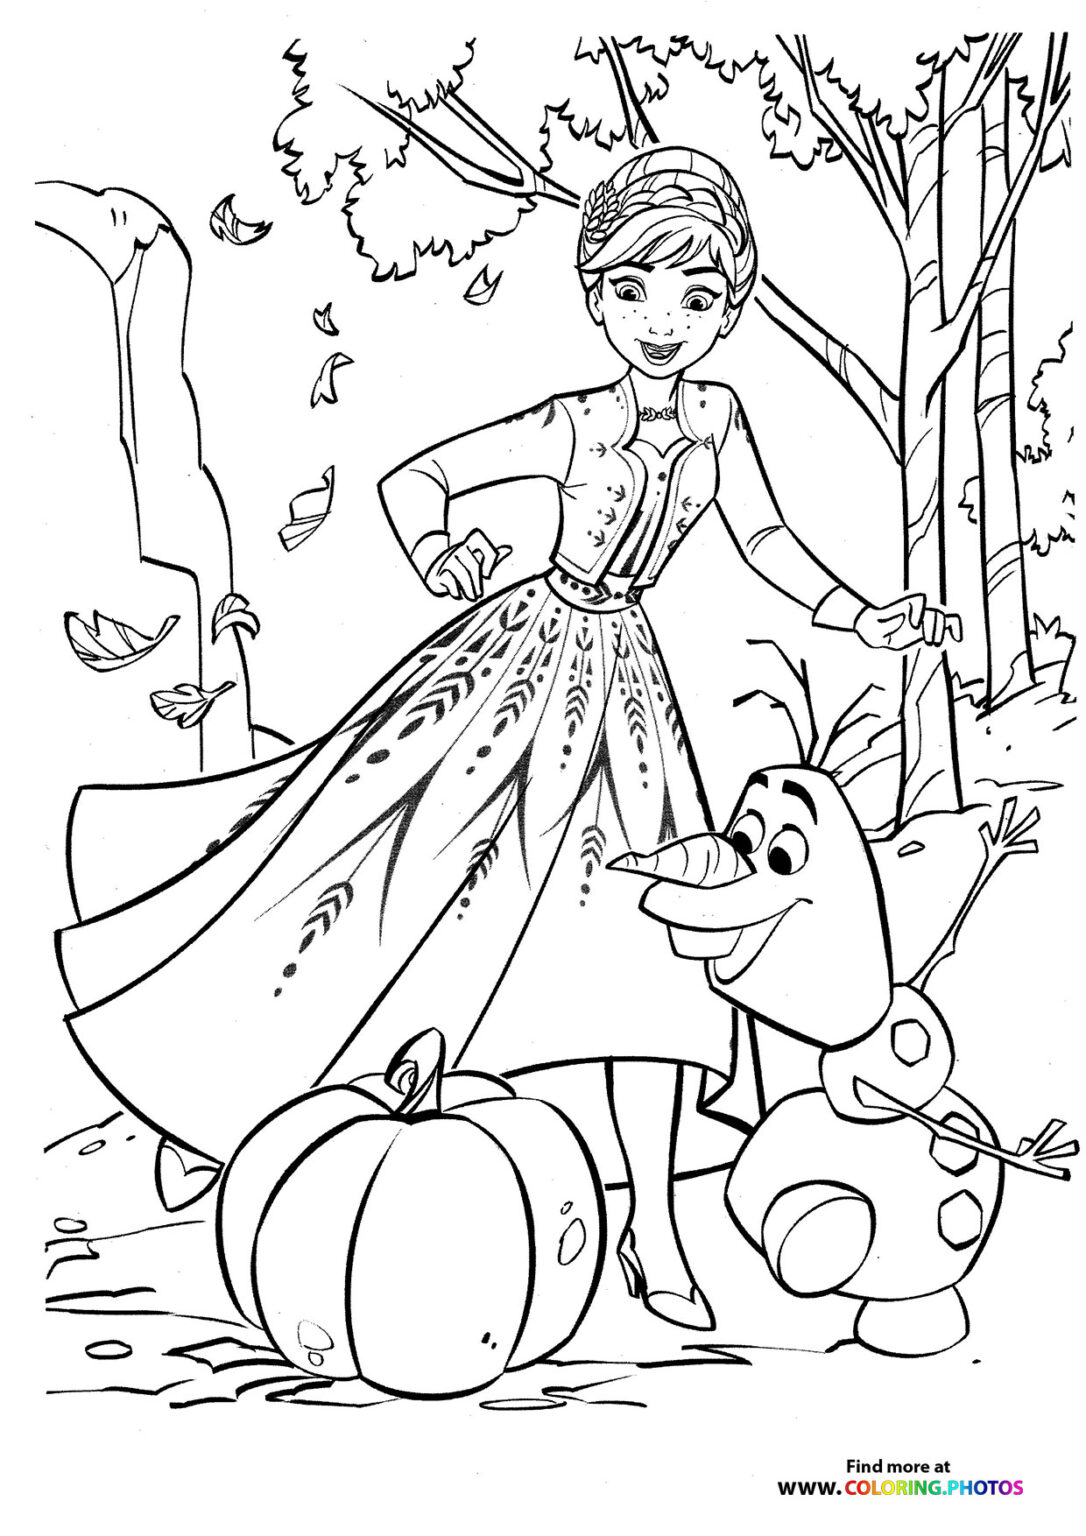 Olaf and Anna with a pumpkin - Coloring Pages for kids